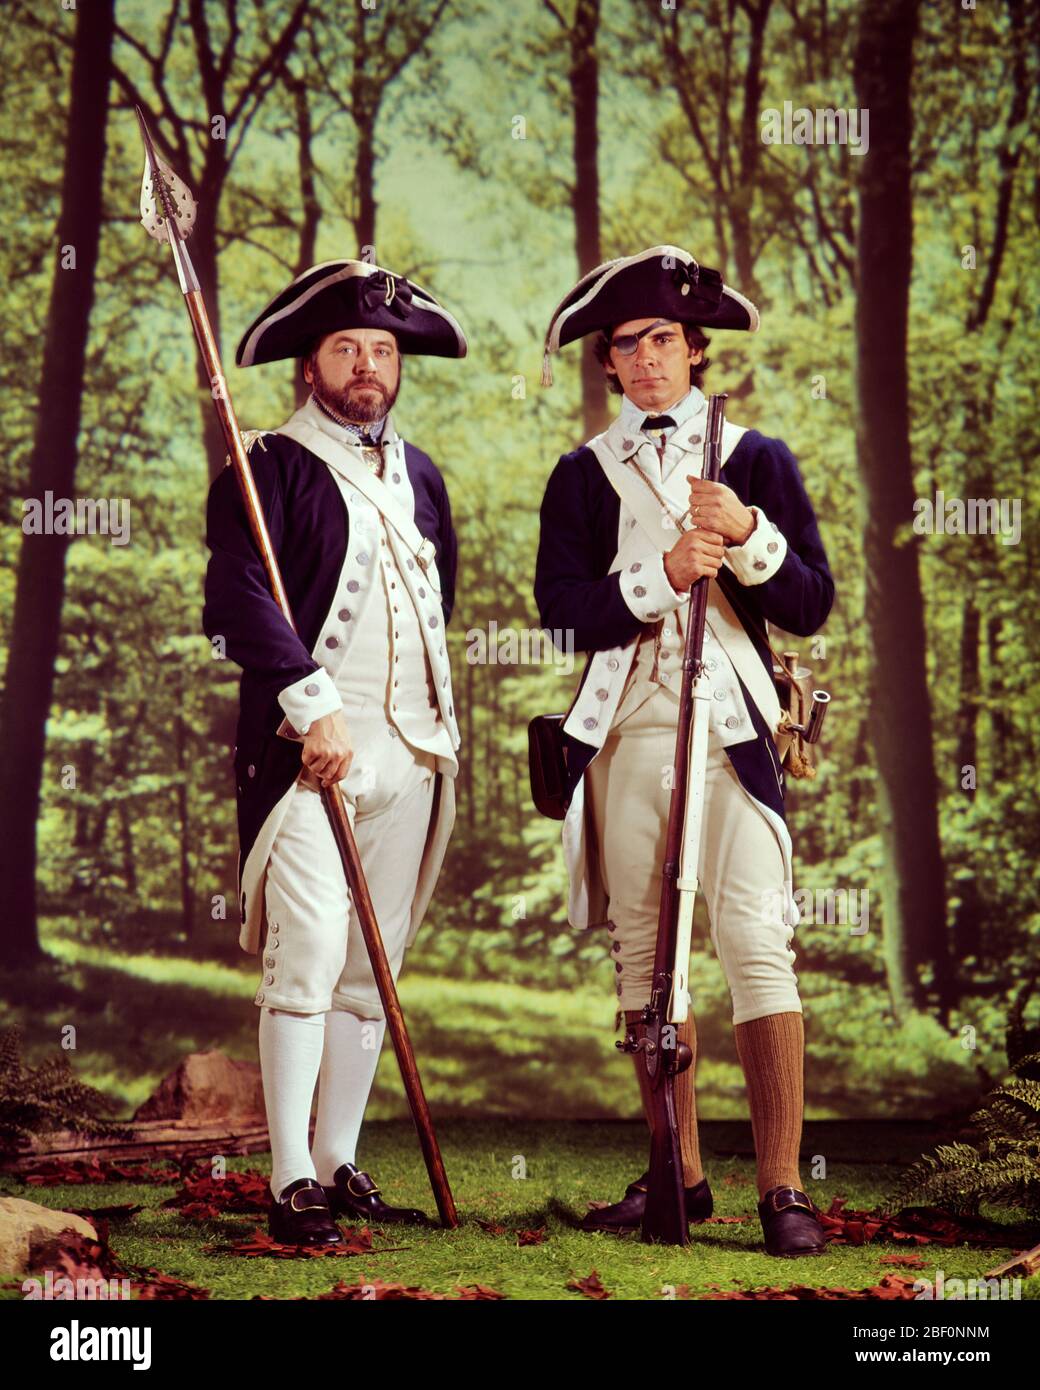 1970s TWO MEN RE-ENACTORS IN AMERICAN REVOLUTION CONTINENTAL ARMY UNIFORMS ONE HOLDING A SPONTOON AND OTHER A FLINTLOCK MUSKET  - kc6820 HAR001 HARS HISTORY STUDIO SHOT REVOLUTIONARY COPY SPACE FRIENDSHIP FULL-LENGTH PERSONS MALES EYE CONTACT FREEDOM WARS ADVENTURE AND TRICORN CONTINENTAL A IN 1776 FLINTLOCK POLITICS UNIFORMS WAR OF INDEPENDENCE CONNECTION RE-ENACTORS MUSKET REVOLT AMERICAN REVOLUTIONARY WAR 1770s COLONIES FIREARM FIREARMS MID-ADULT MID-ADULT MAN SPONTOON CAUCASIAN ETHNICITY ESPONTOON HALF-PIKE HAR001 MINUTEMEN OLD FASHIONED Stock Photo